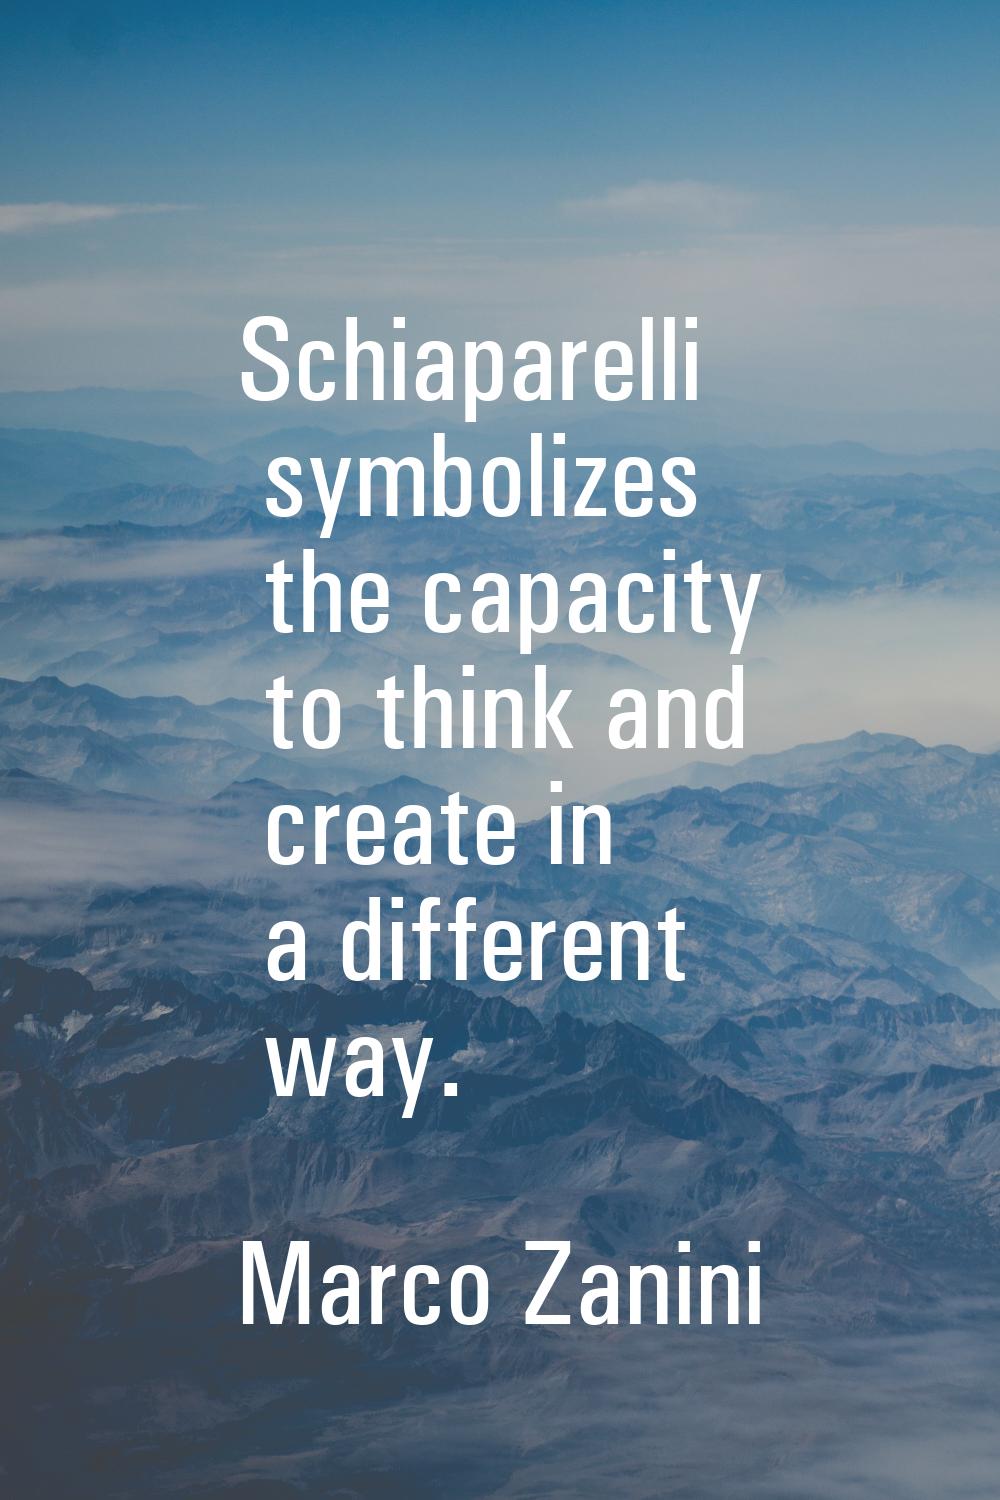 Schiaparelli symbolizes the capacity to think and create in a different way.